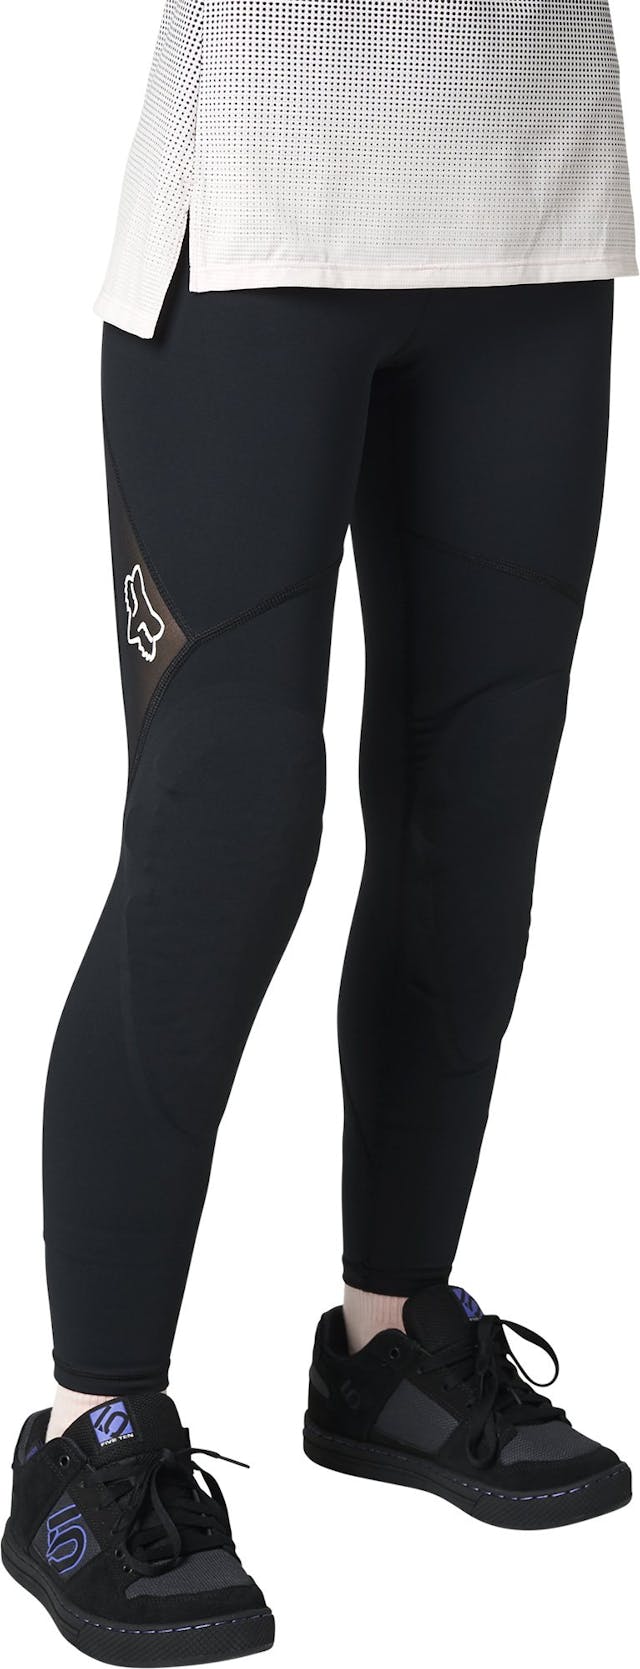 Product image for Ranger Tight - Women's